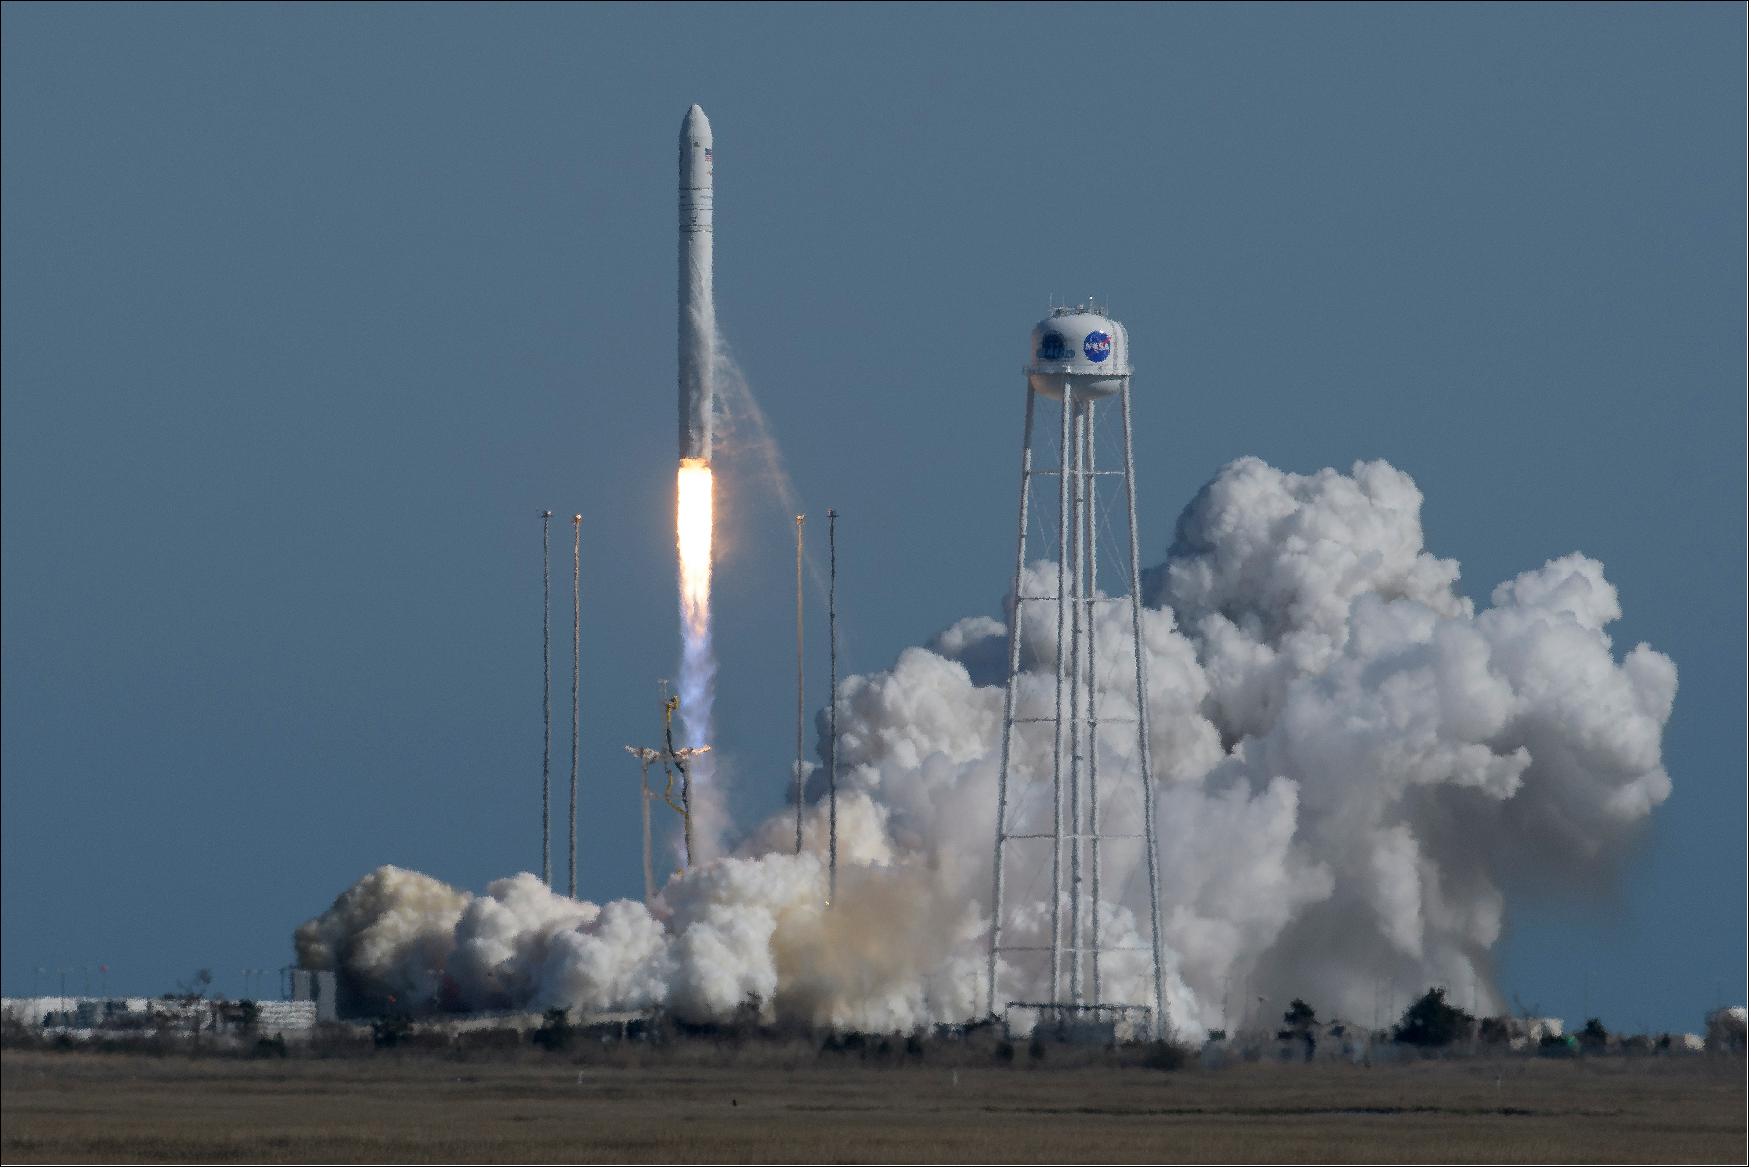 Figure 2: The Northrop Grumman Antares rocket, with Cygnus resupply spacecraft (CRS-11) onboard, launches from Pad-0A on 17 April 2019 at NASA's Wallops Flight Facility in Virginia (image credit: NASA, Bill Ingalls)